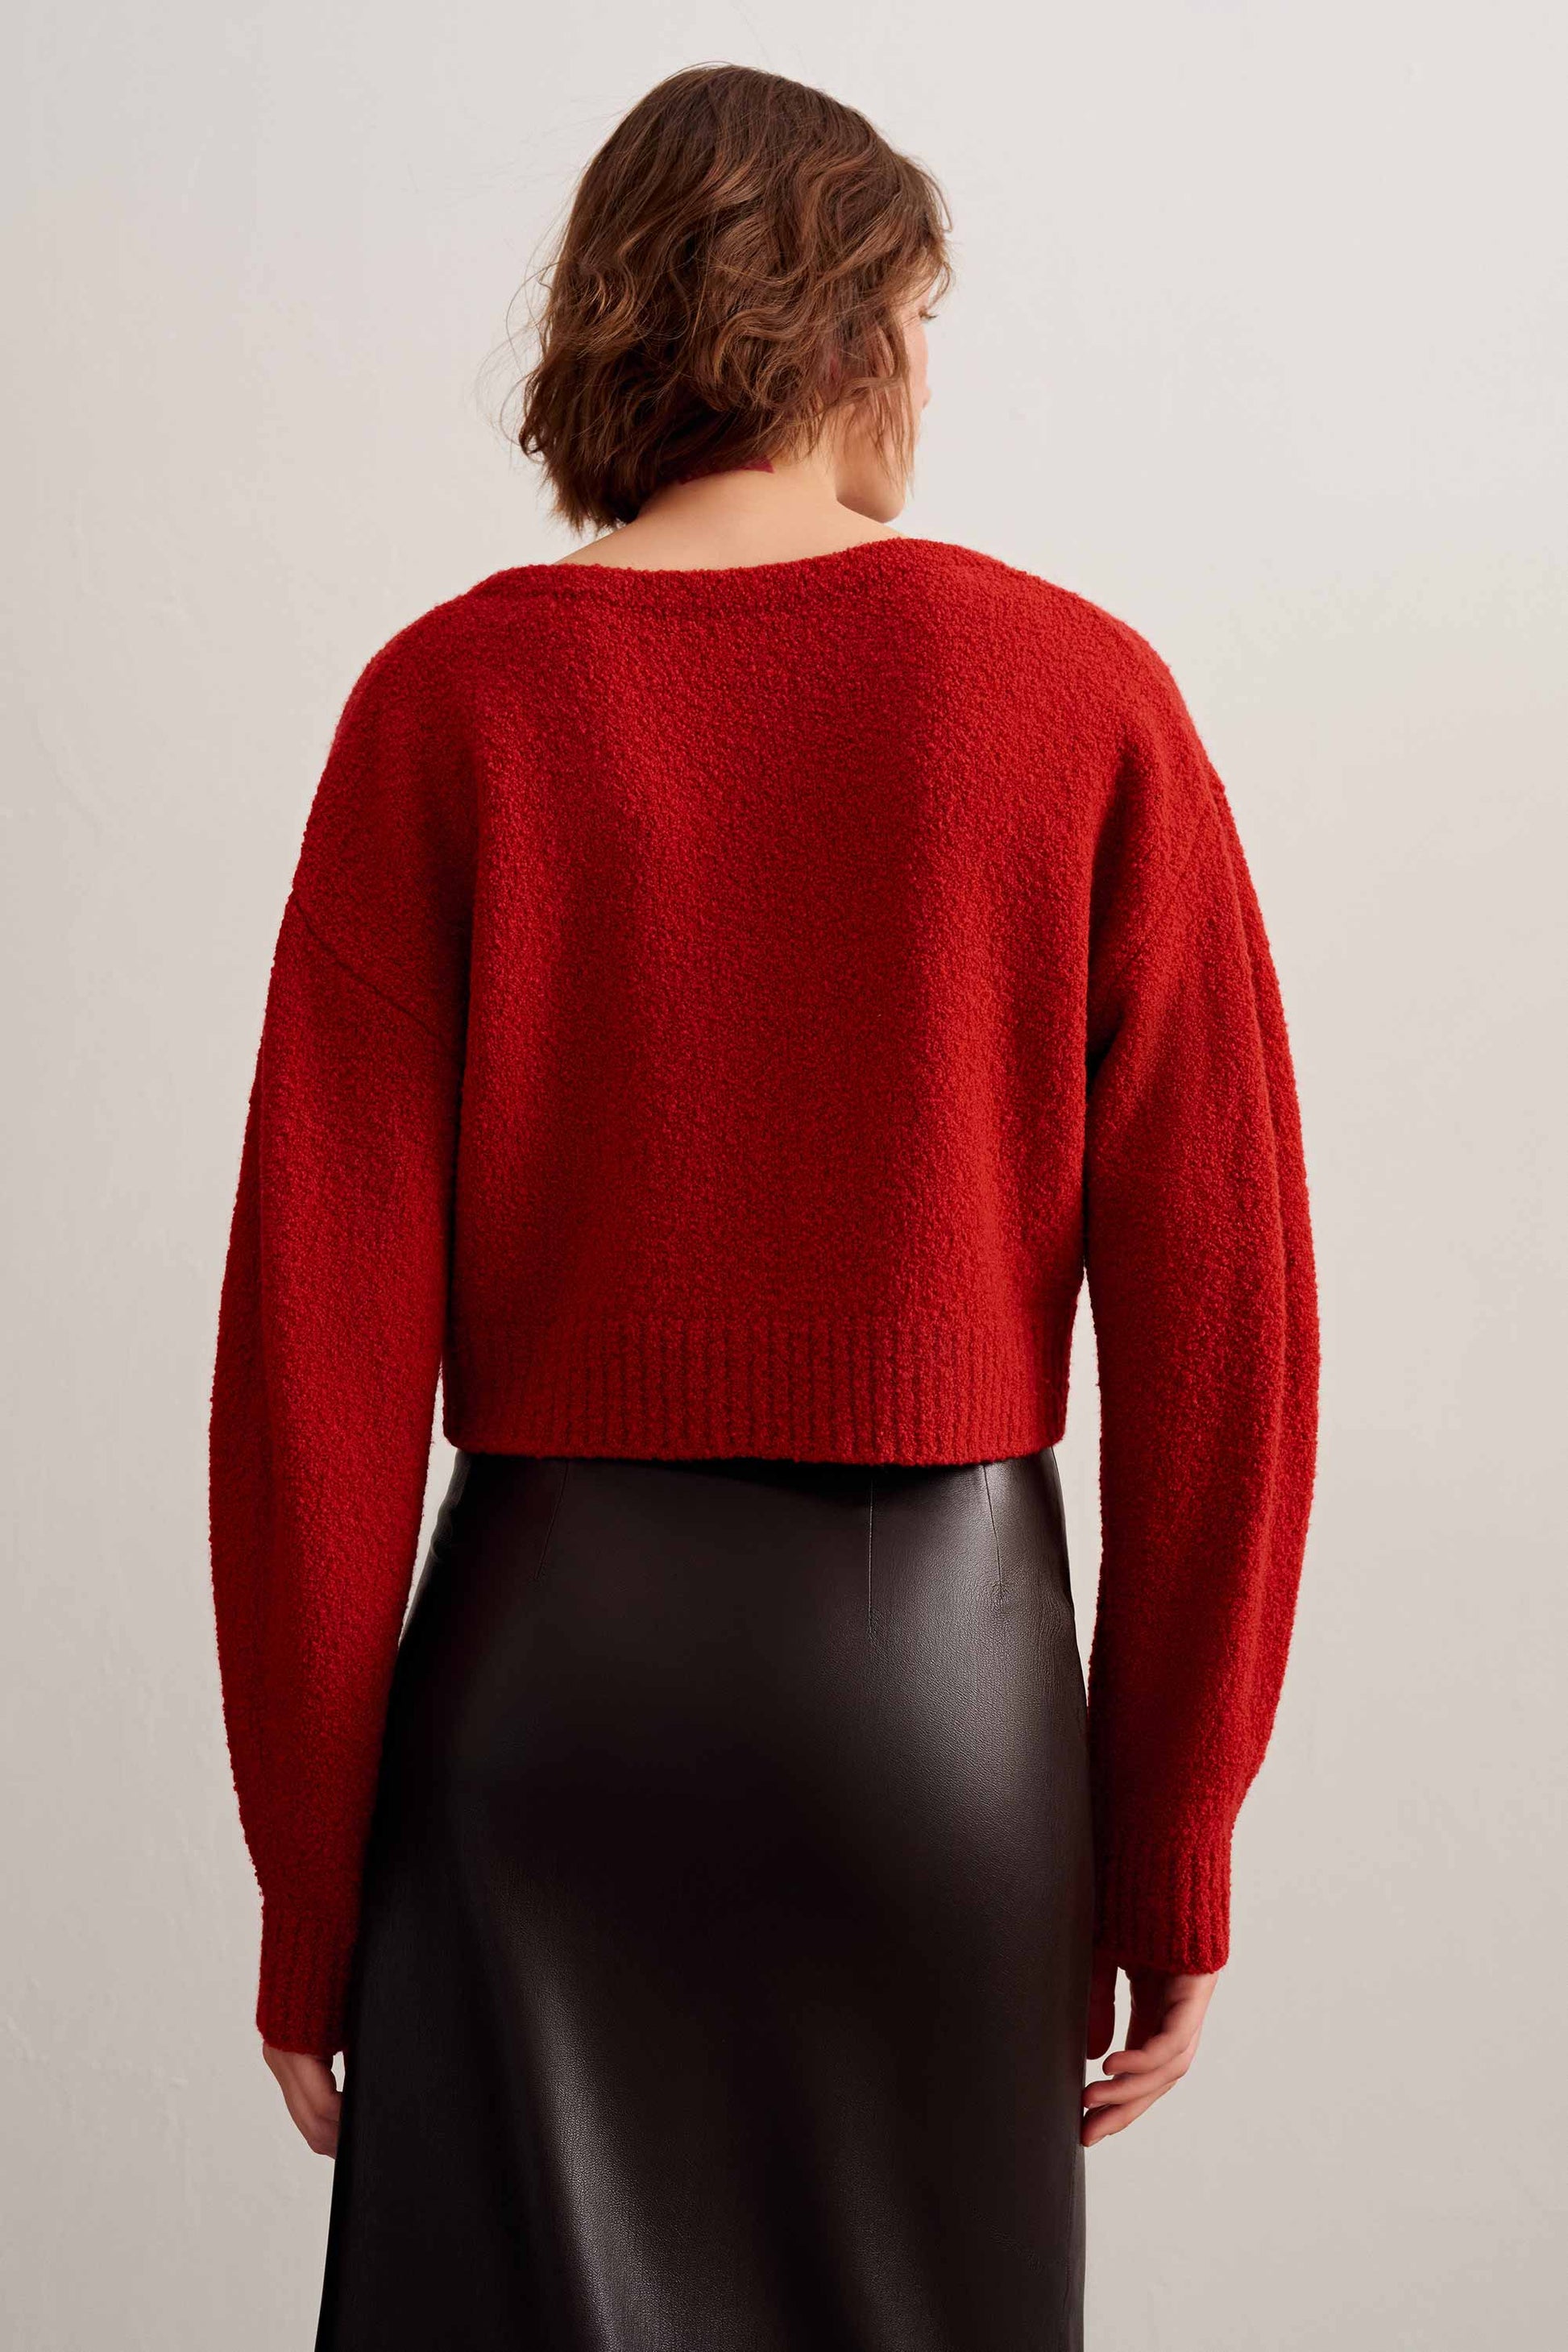 back of a woman wearing a red knot cardigan